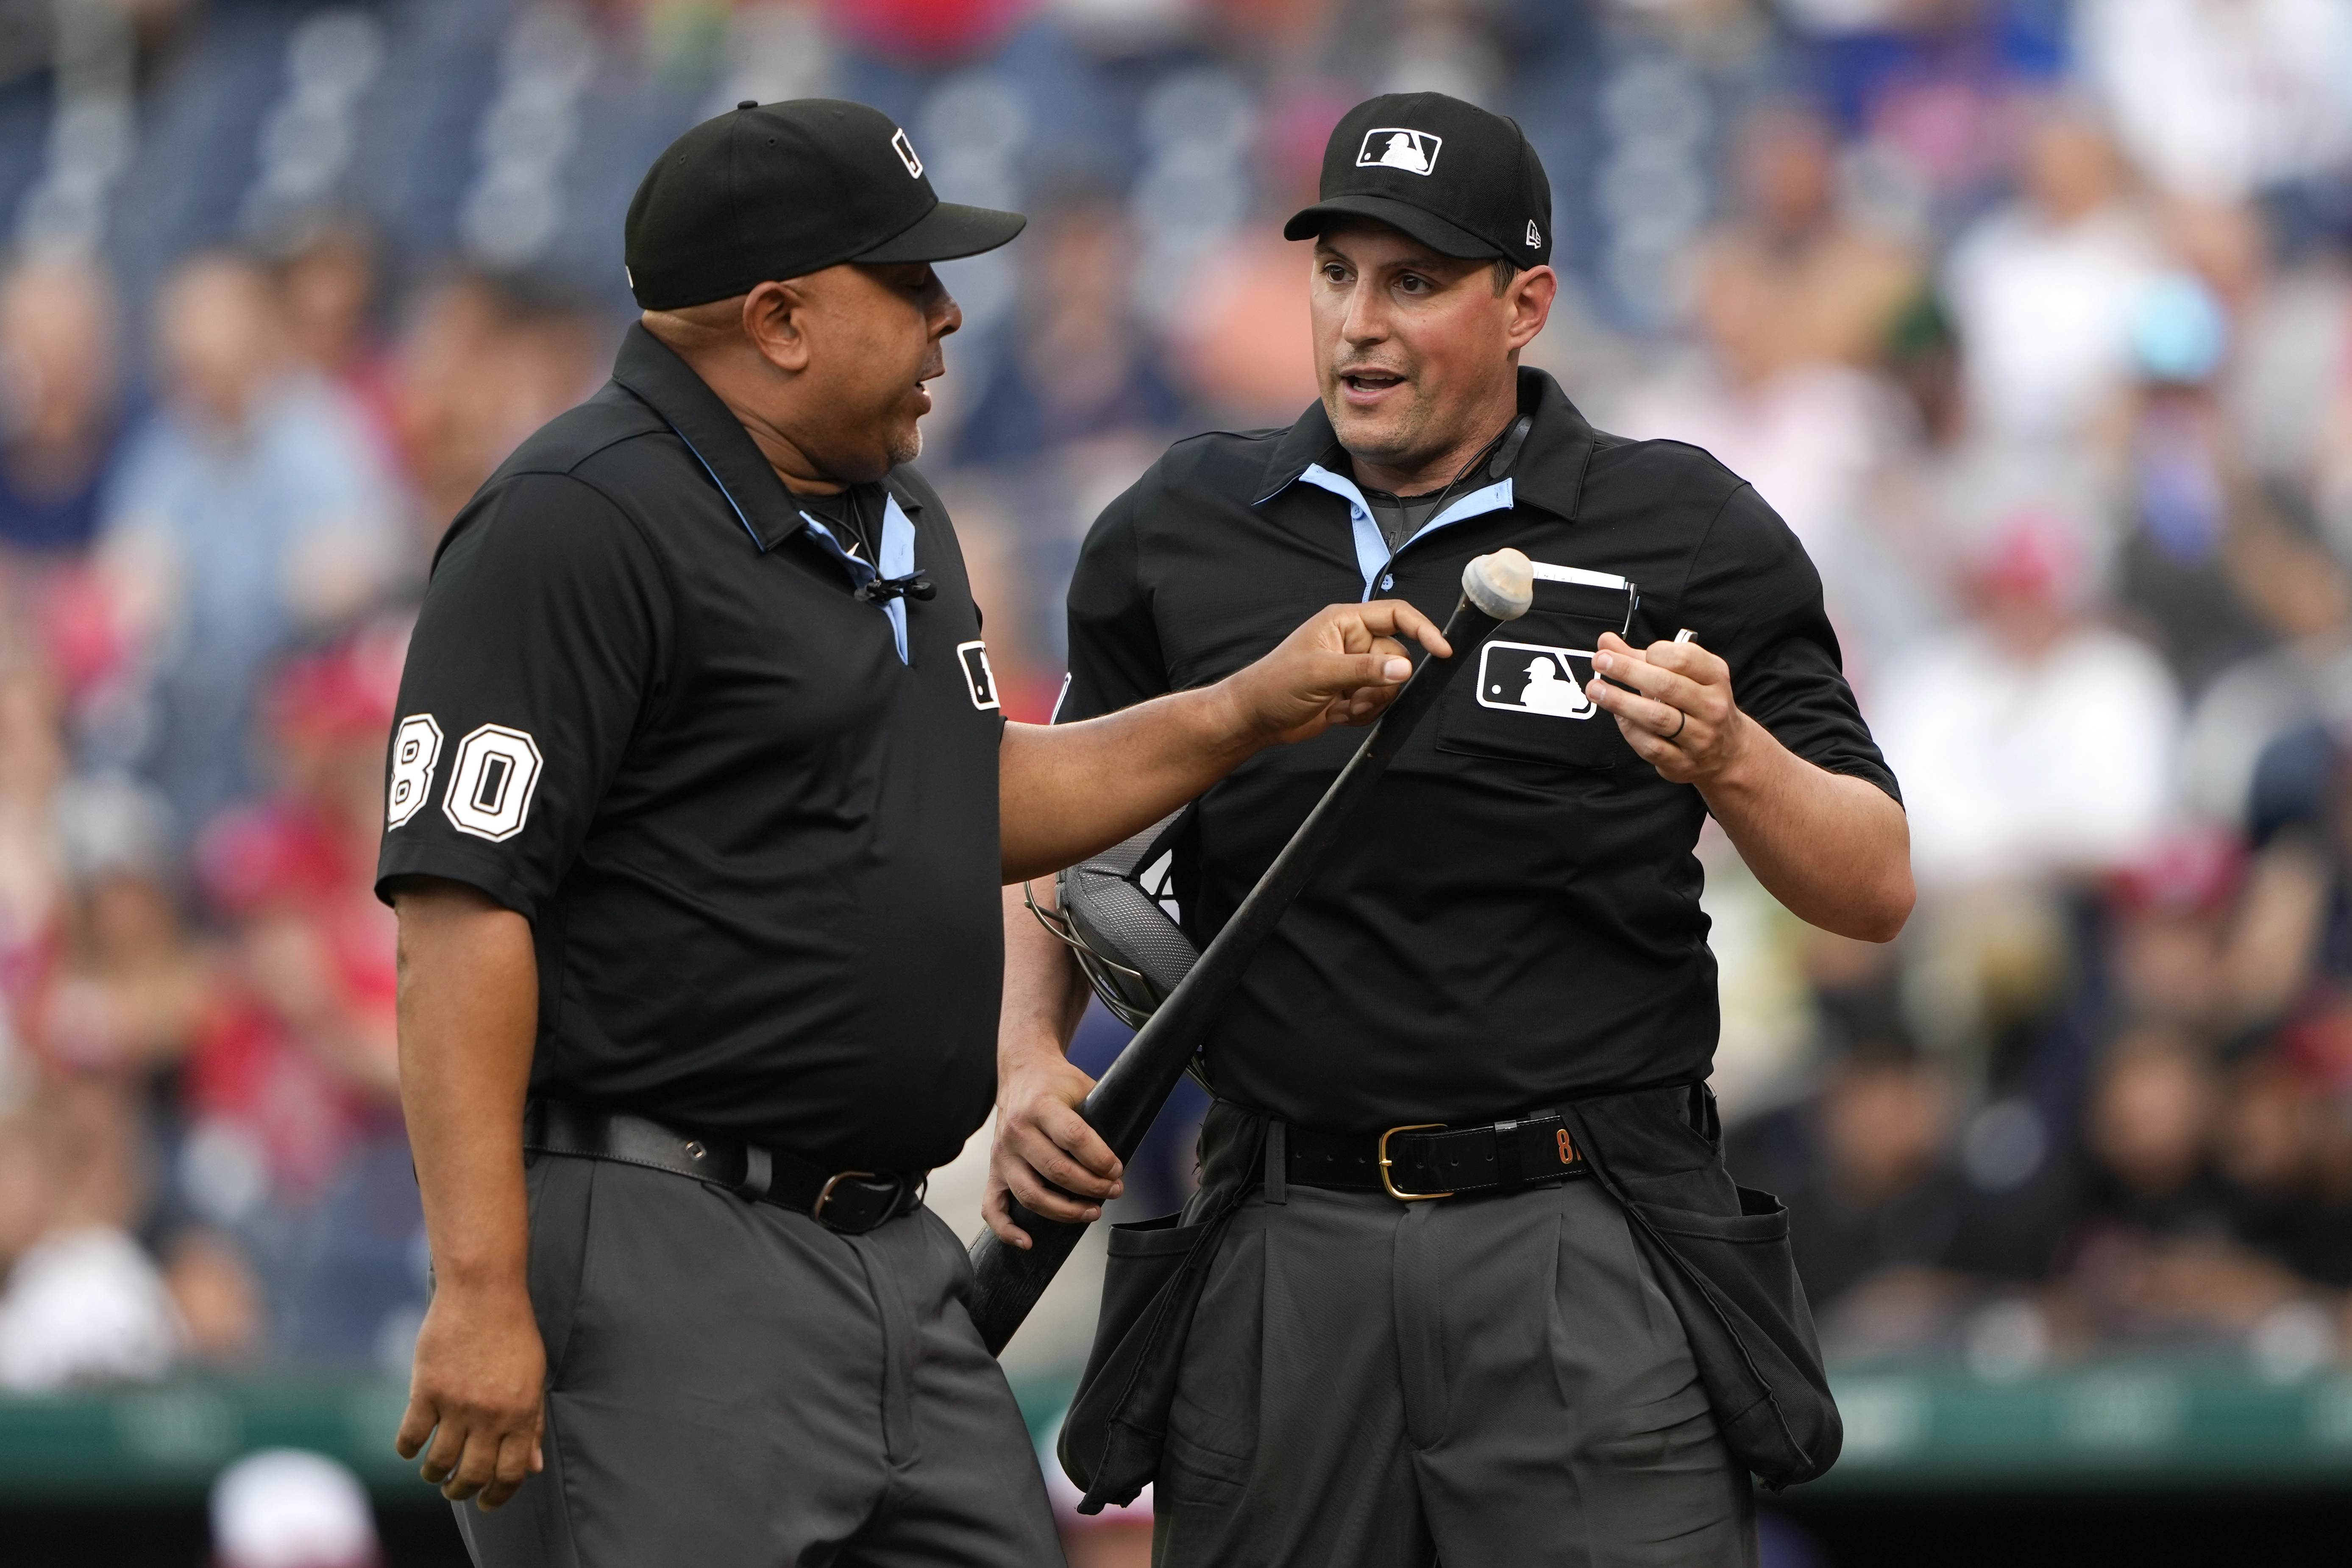 Cincinnati Reds: The umpire is to blame for the altercation in